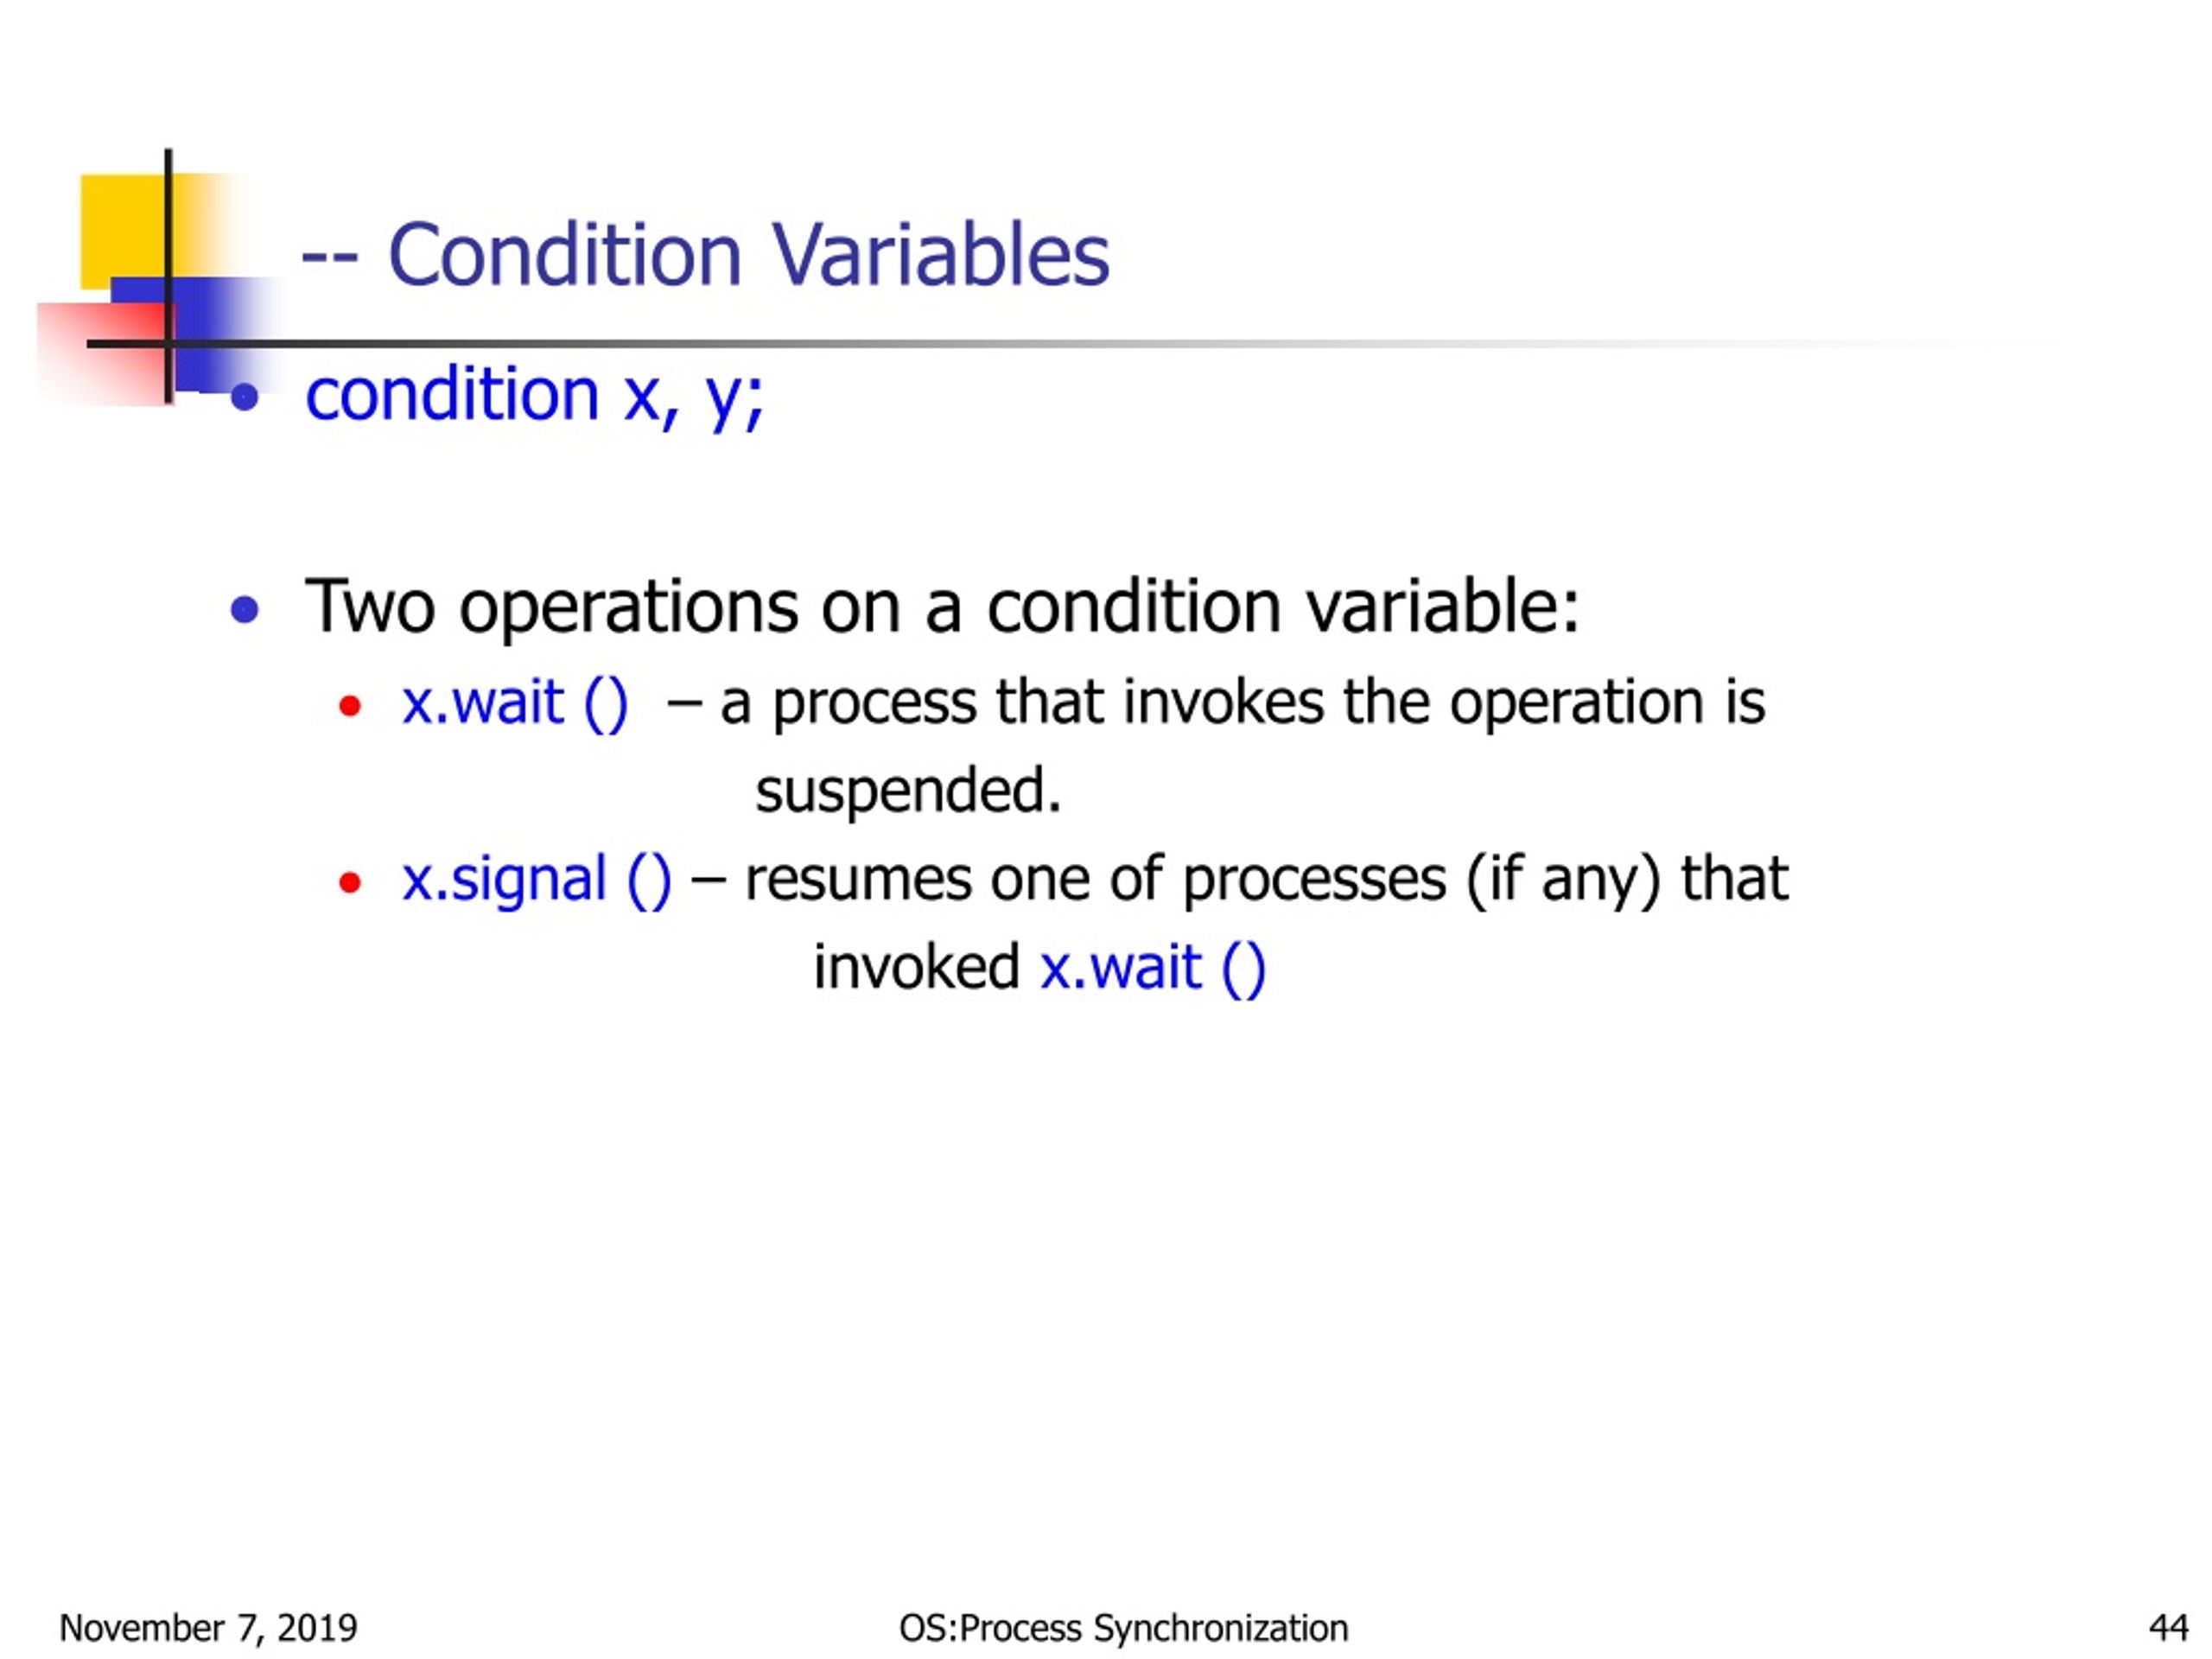 Condition variable. Processes synchronize.